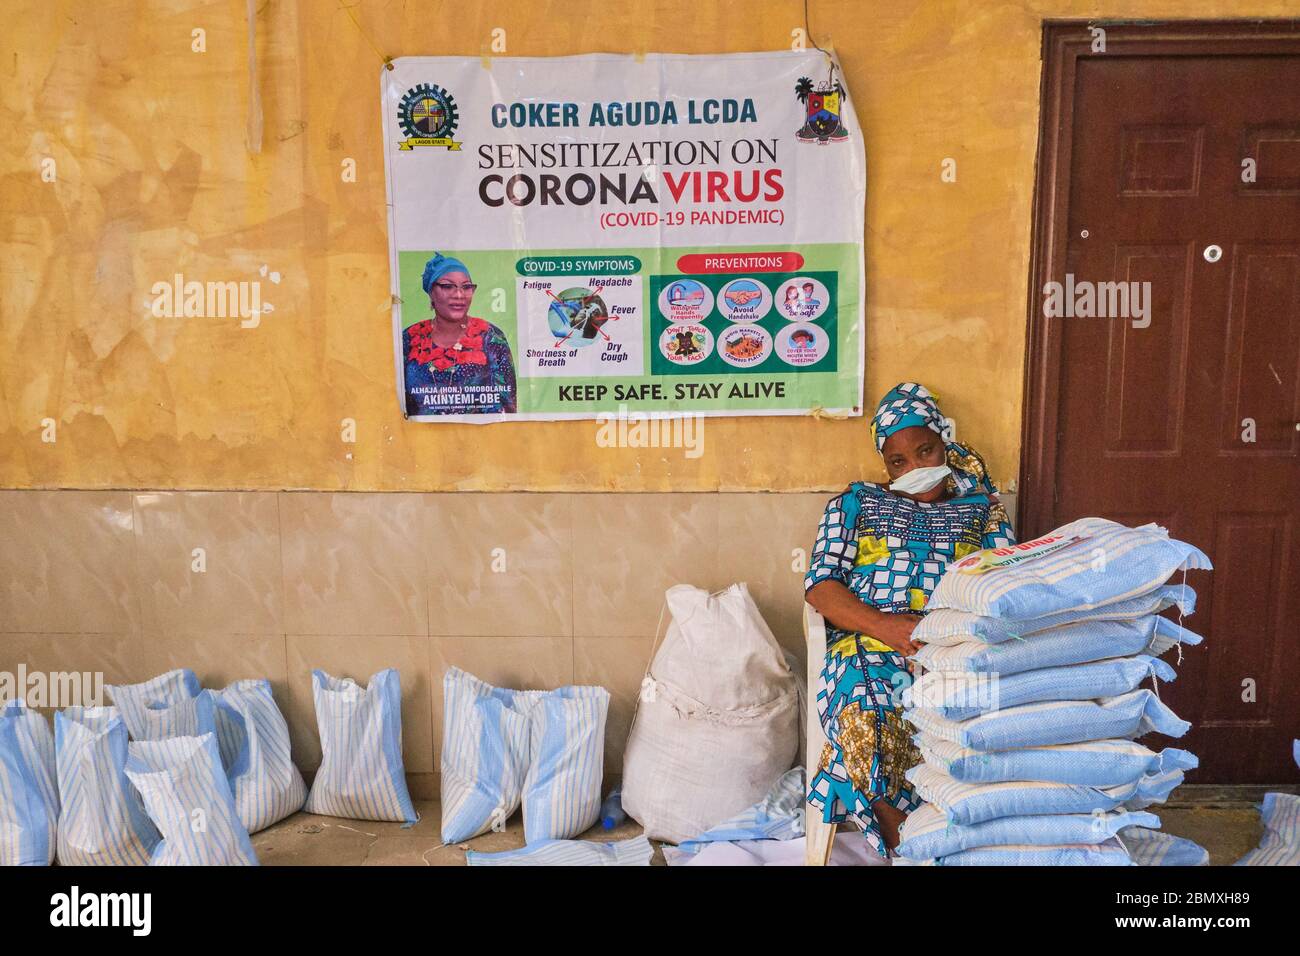 Bags of rice packaged as palliatives for people in the Coker-Aguda Local Council Area of Lagos-Nigeria by the Council Head during Covid-19 lockdown. Stock Photo